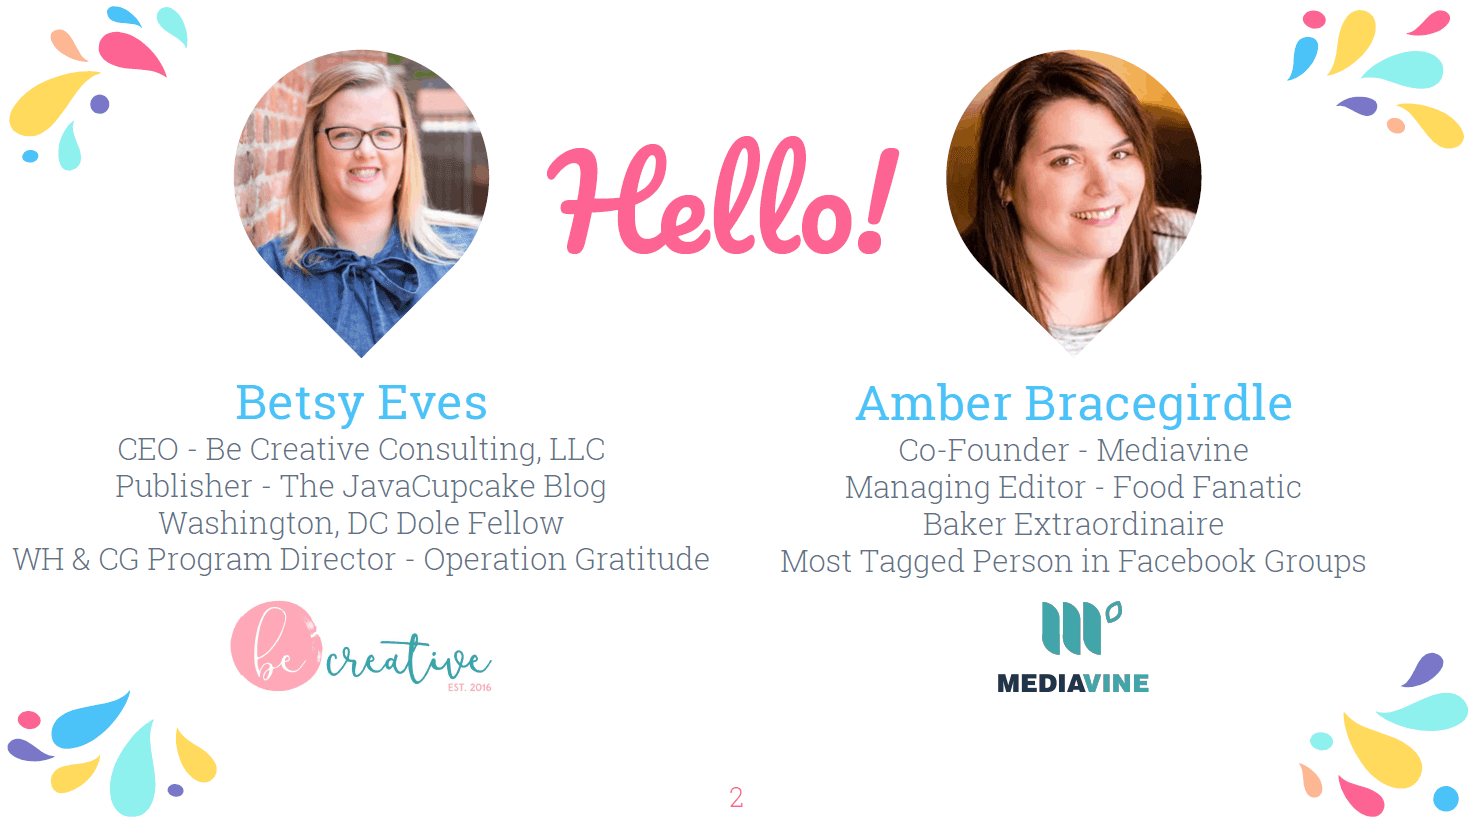 A graphic introducing Betsy Eves, of Be Creative Consulting, LLC, and Amber Bracegirdle, Mediavine.